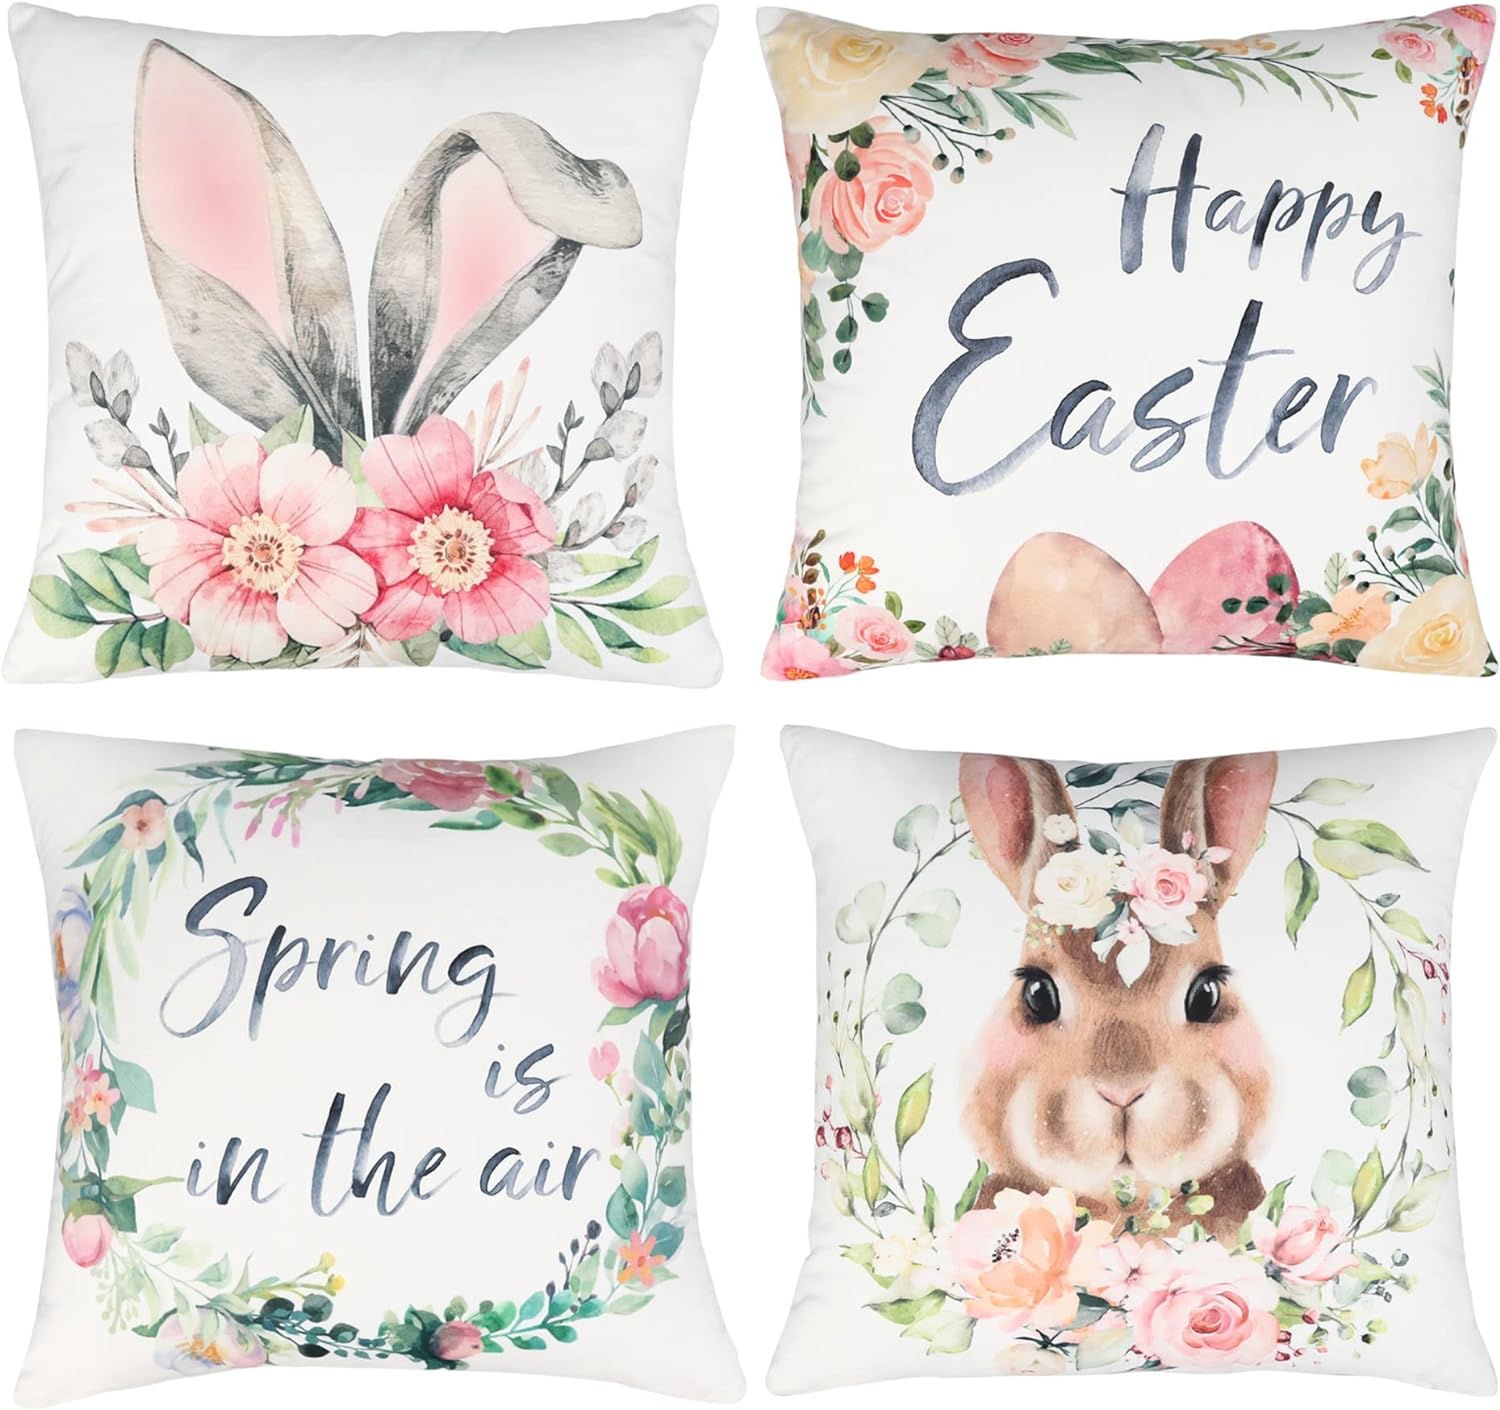 HPUK Set of 4 Easter Pillow Covers, 18x18 inch Decorative Couch Pillows for Spring, Gift, Living Room, Bedroom, Sofa, Chair, Easter Decorations